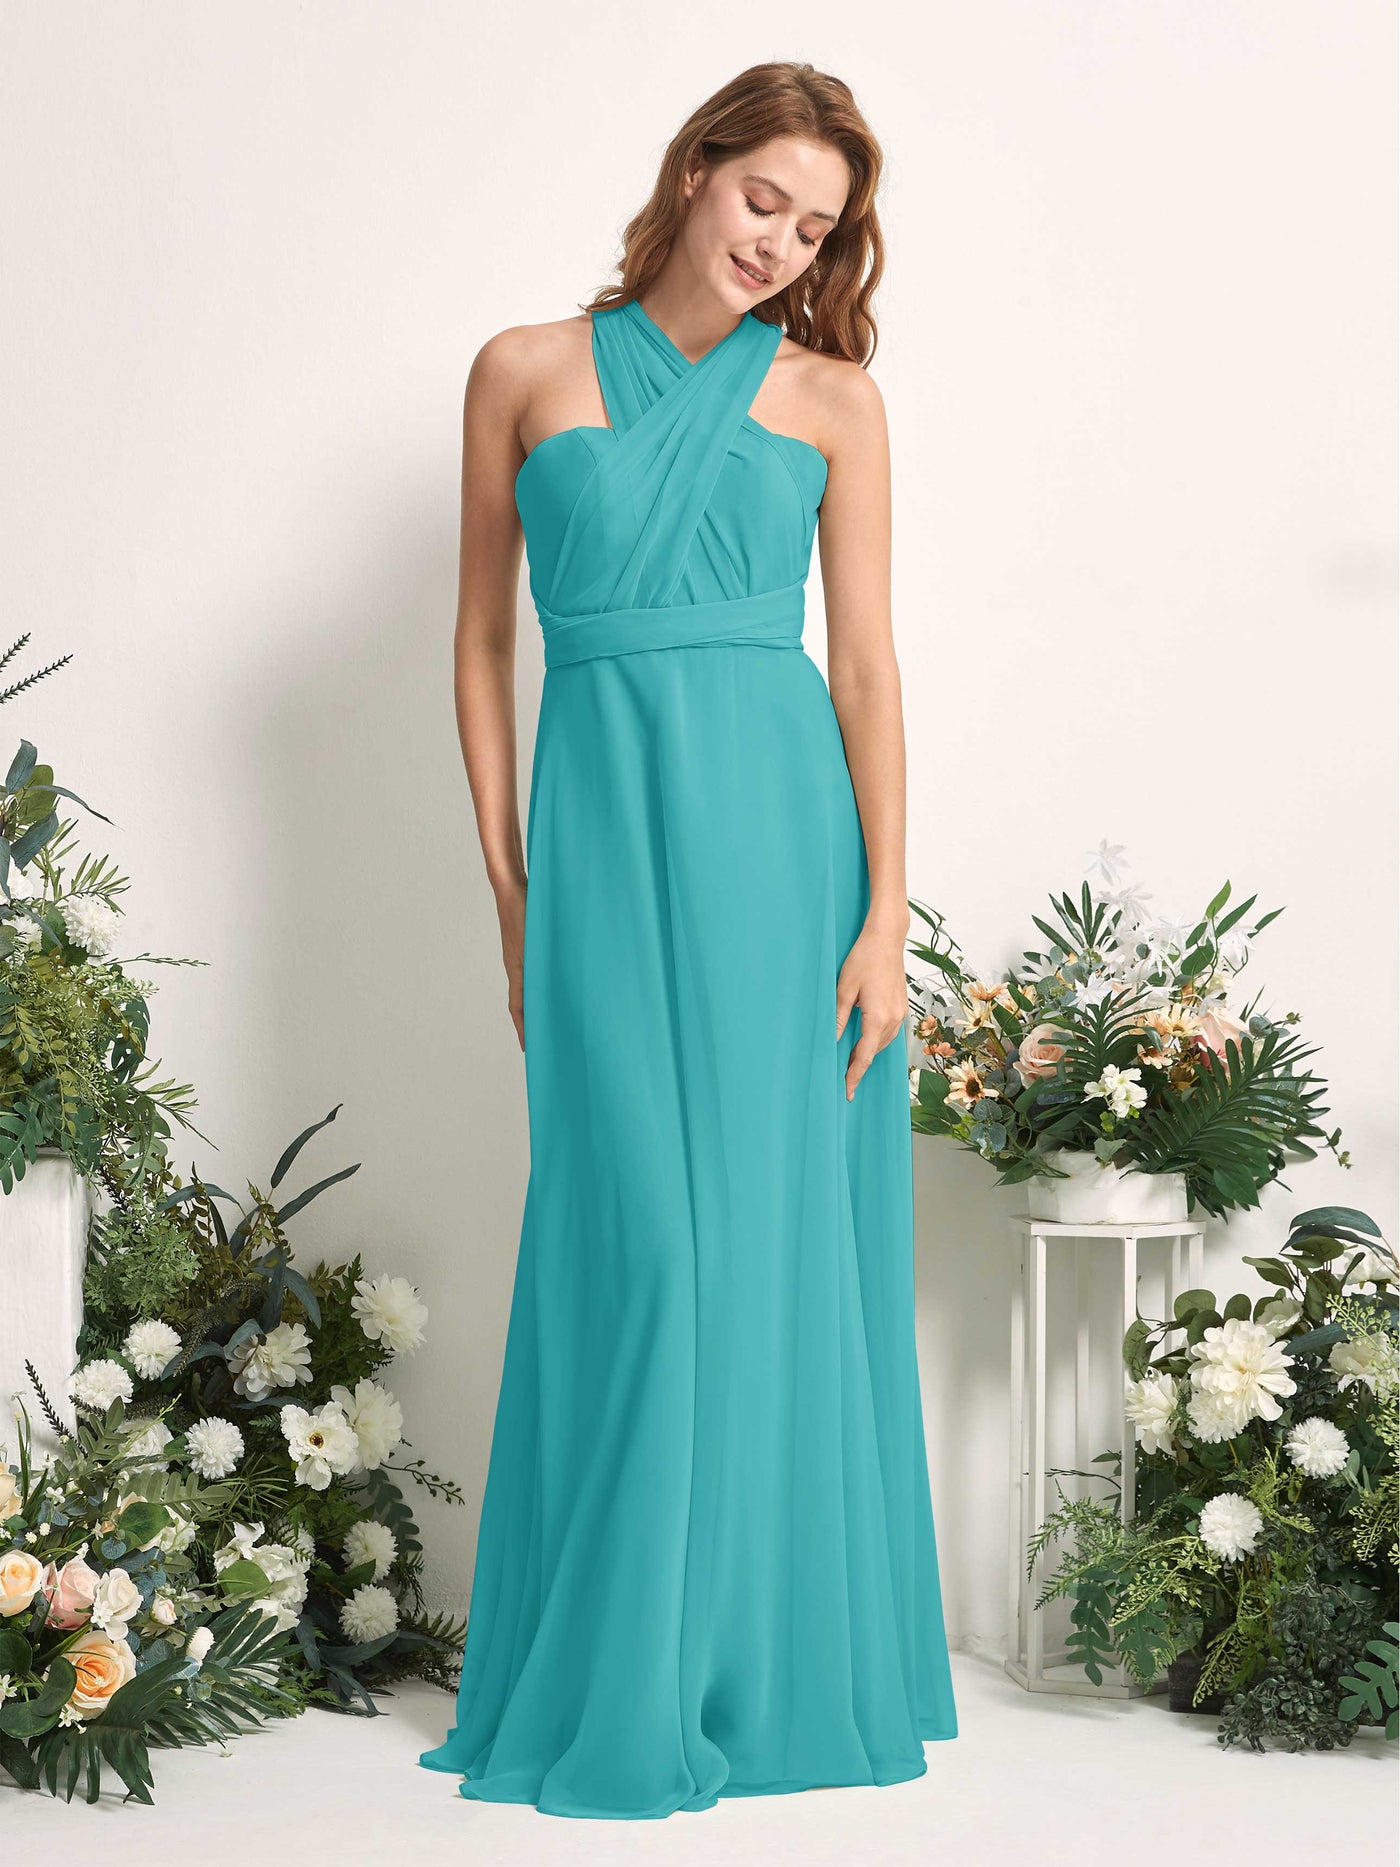 Turquoise Bridesmaid Dresses Bridesmaid Dress A-line Chiffon Halter Full Length Short Sleeves Wedding Party Dress (81226323)#color_turquoise